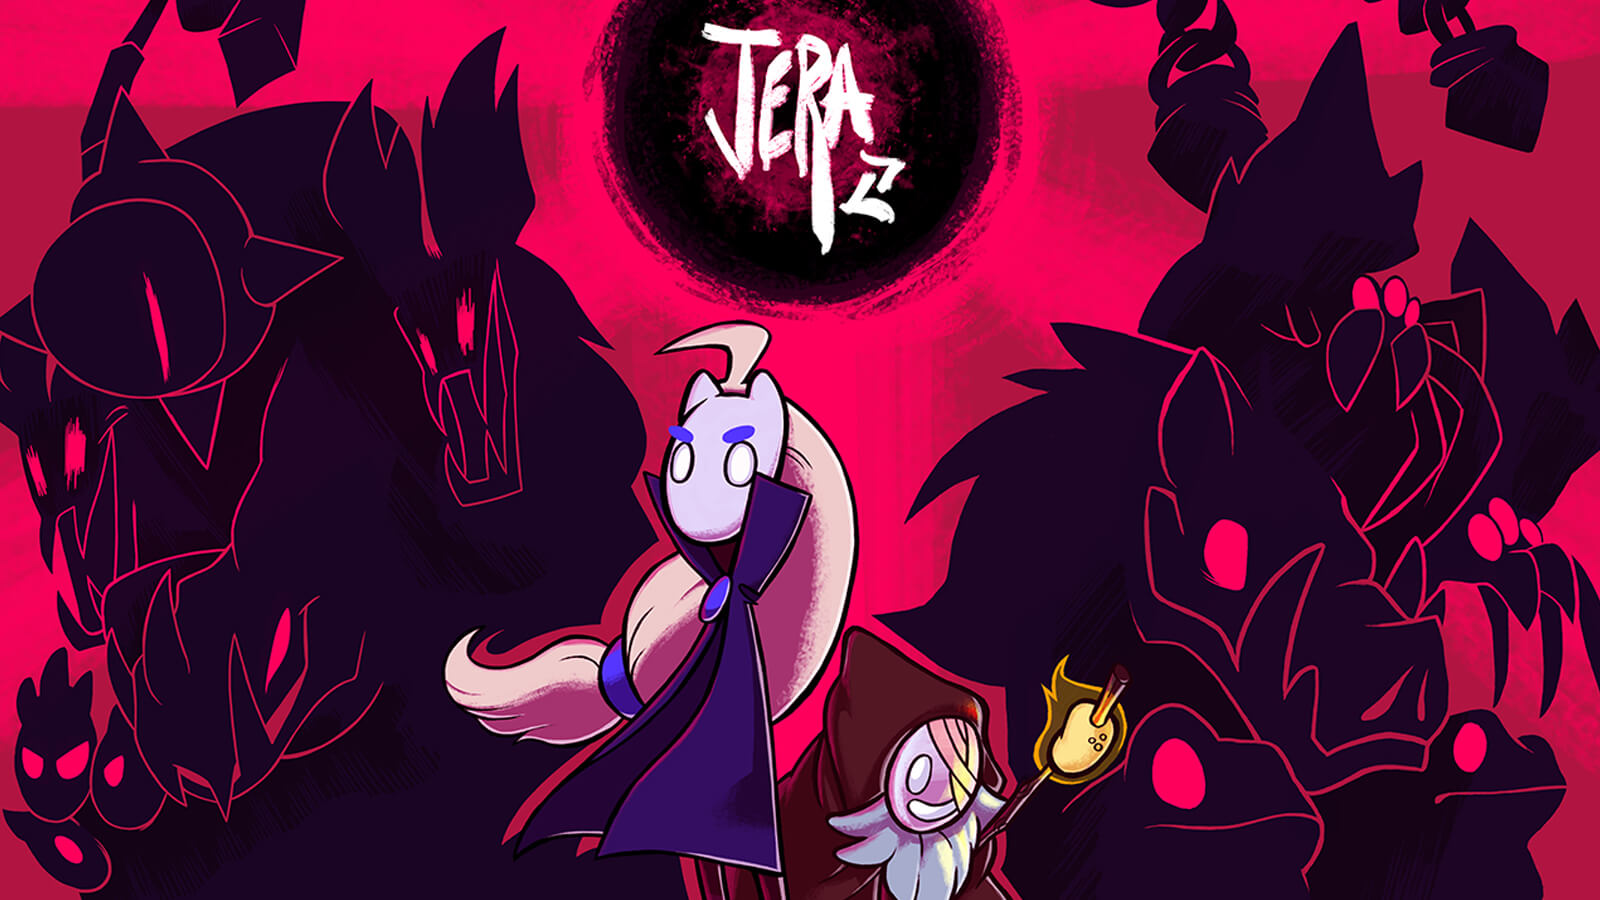 The title screen for Jera, featuring two main characters with silhouettes of monsters behind them